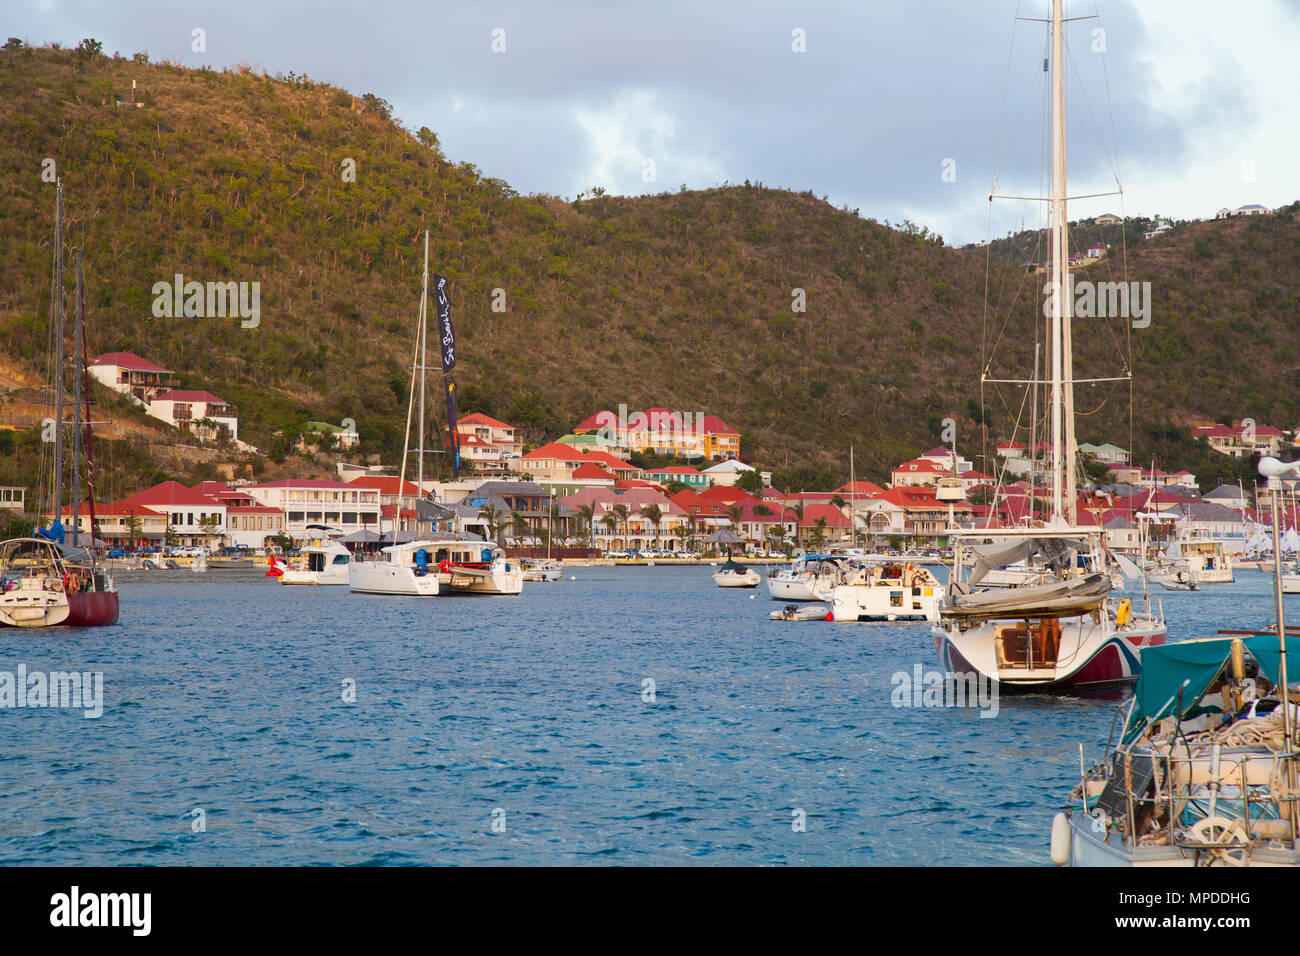 Baie de Gustavia, Saint Barthelemy, St Barth's French Caribbean Island Banque D'Images